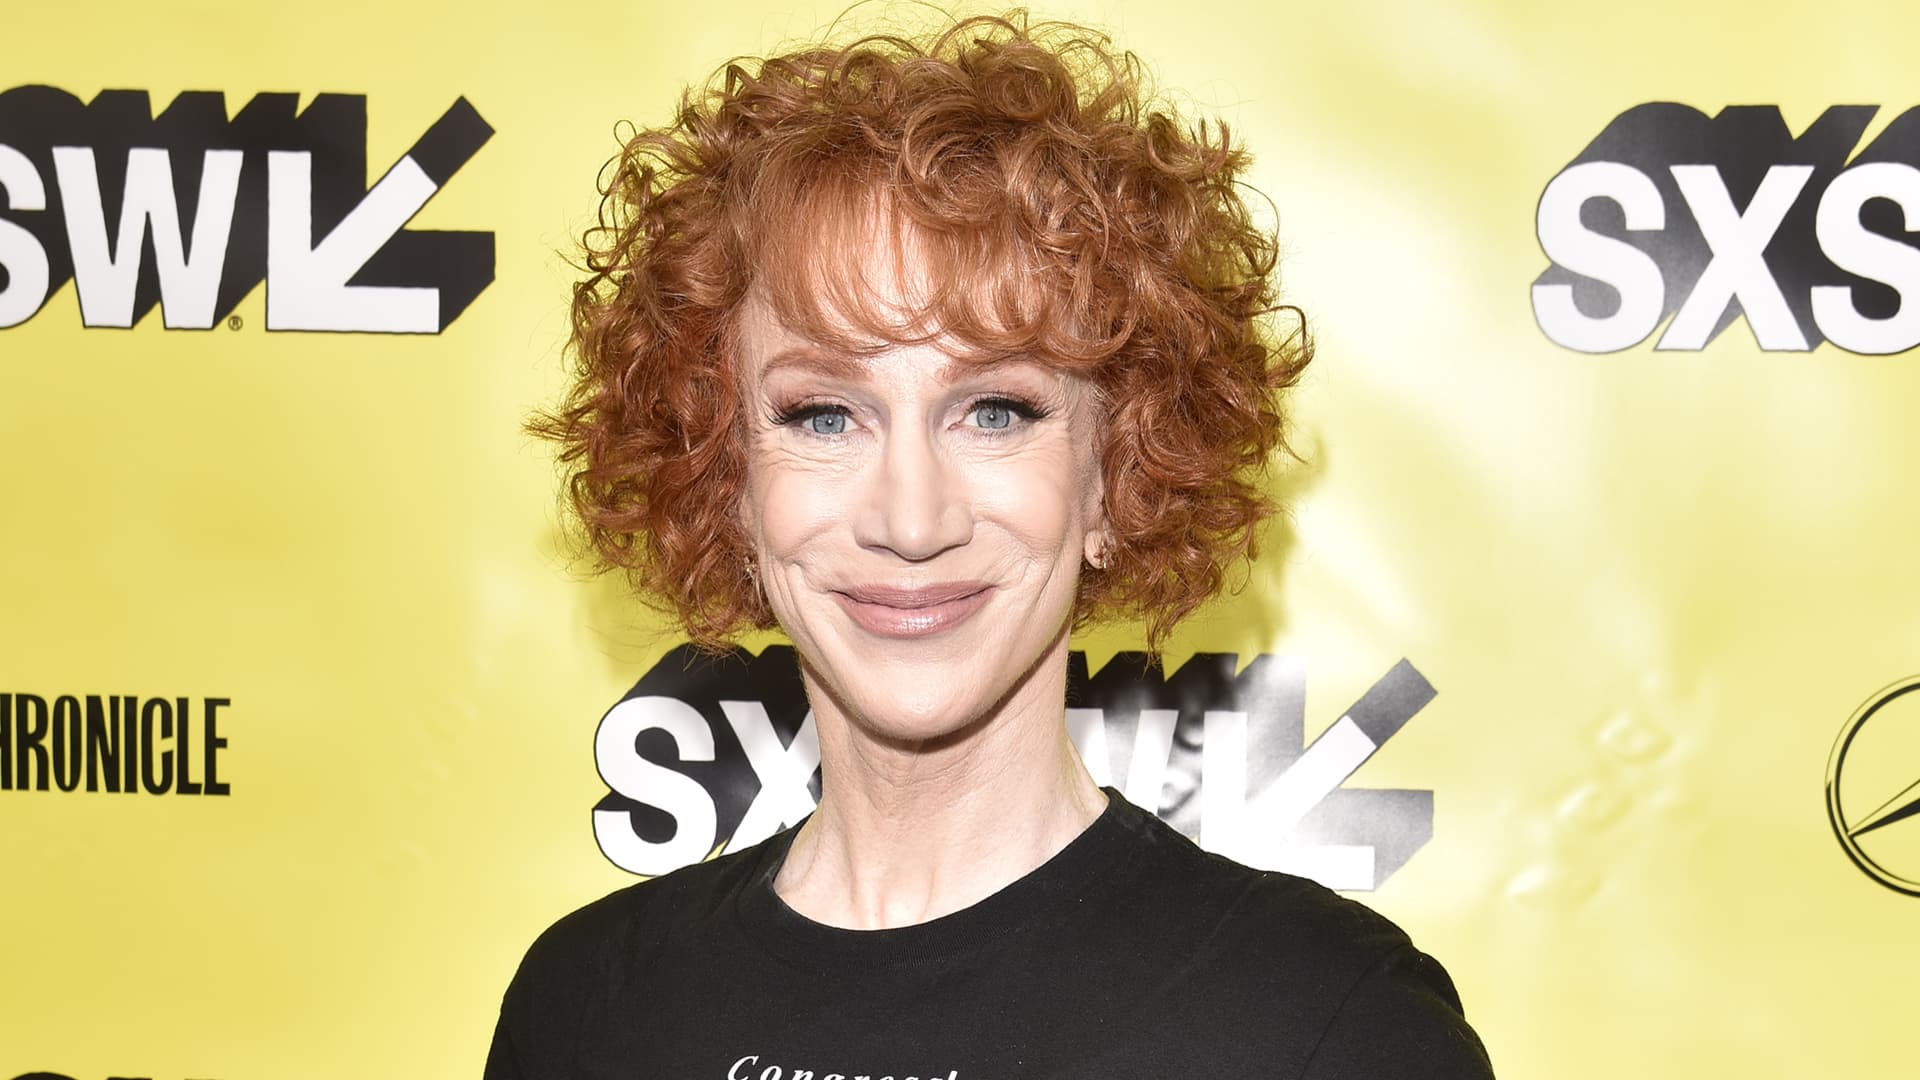 Kathy Griffin attends the premiere of 'A Hell of a Story' during the 2019 SXSW Conference and Festival at the Zach Theatre on March 11, 2019 in Austin, Texas.